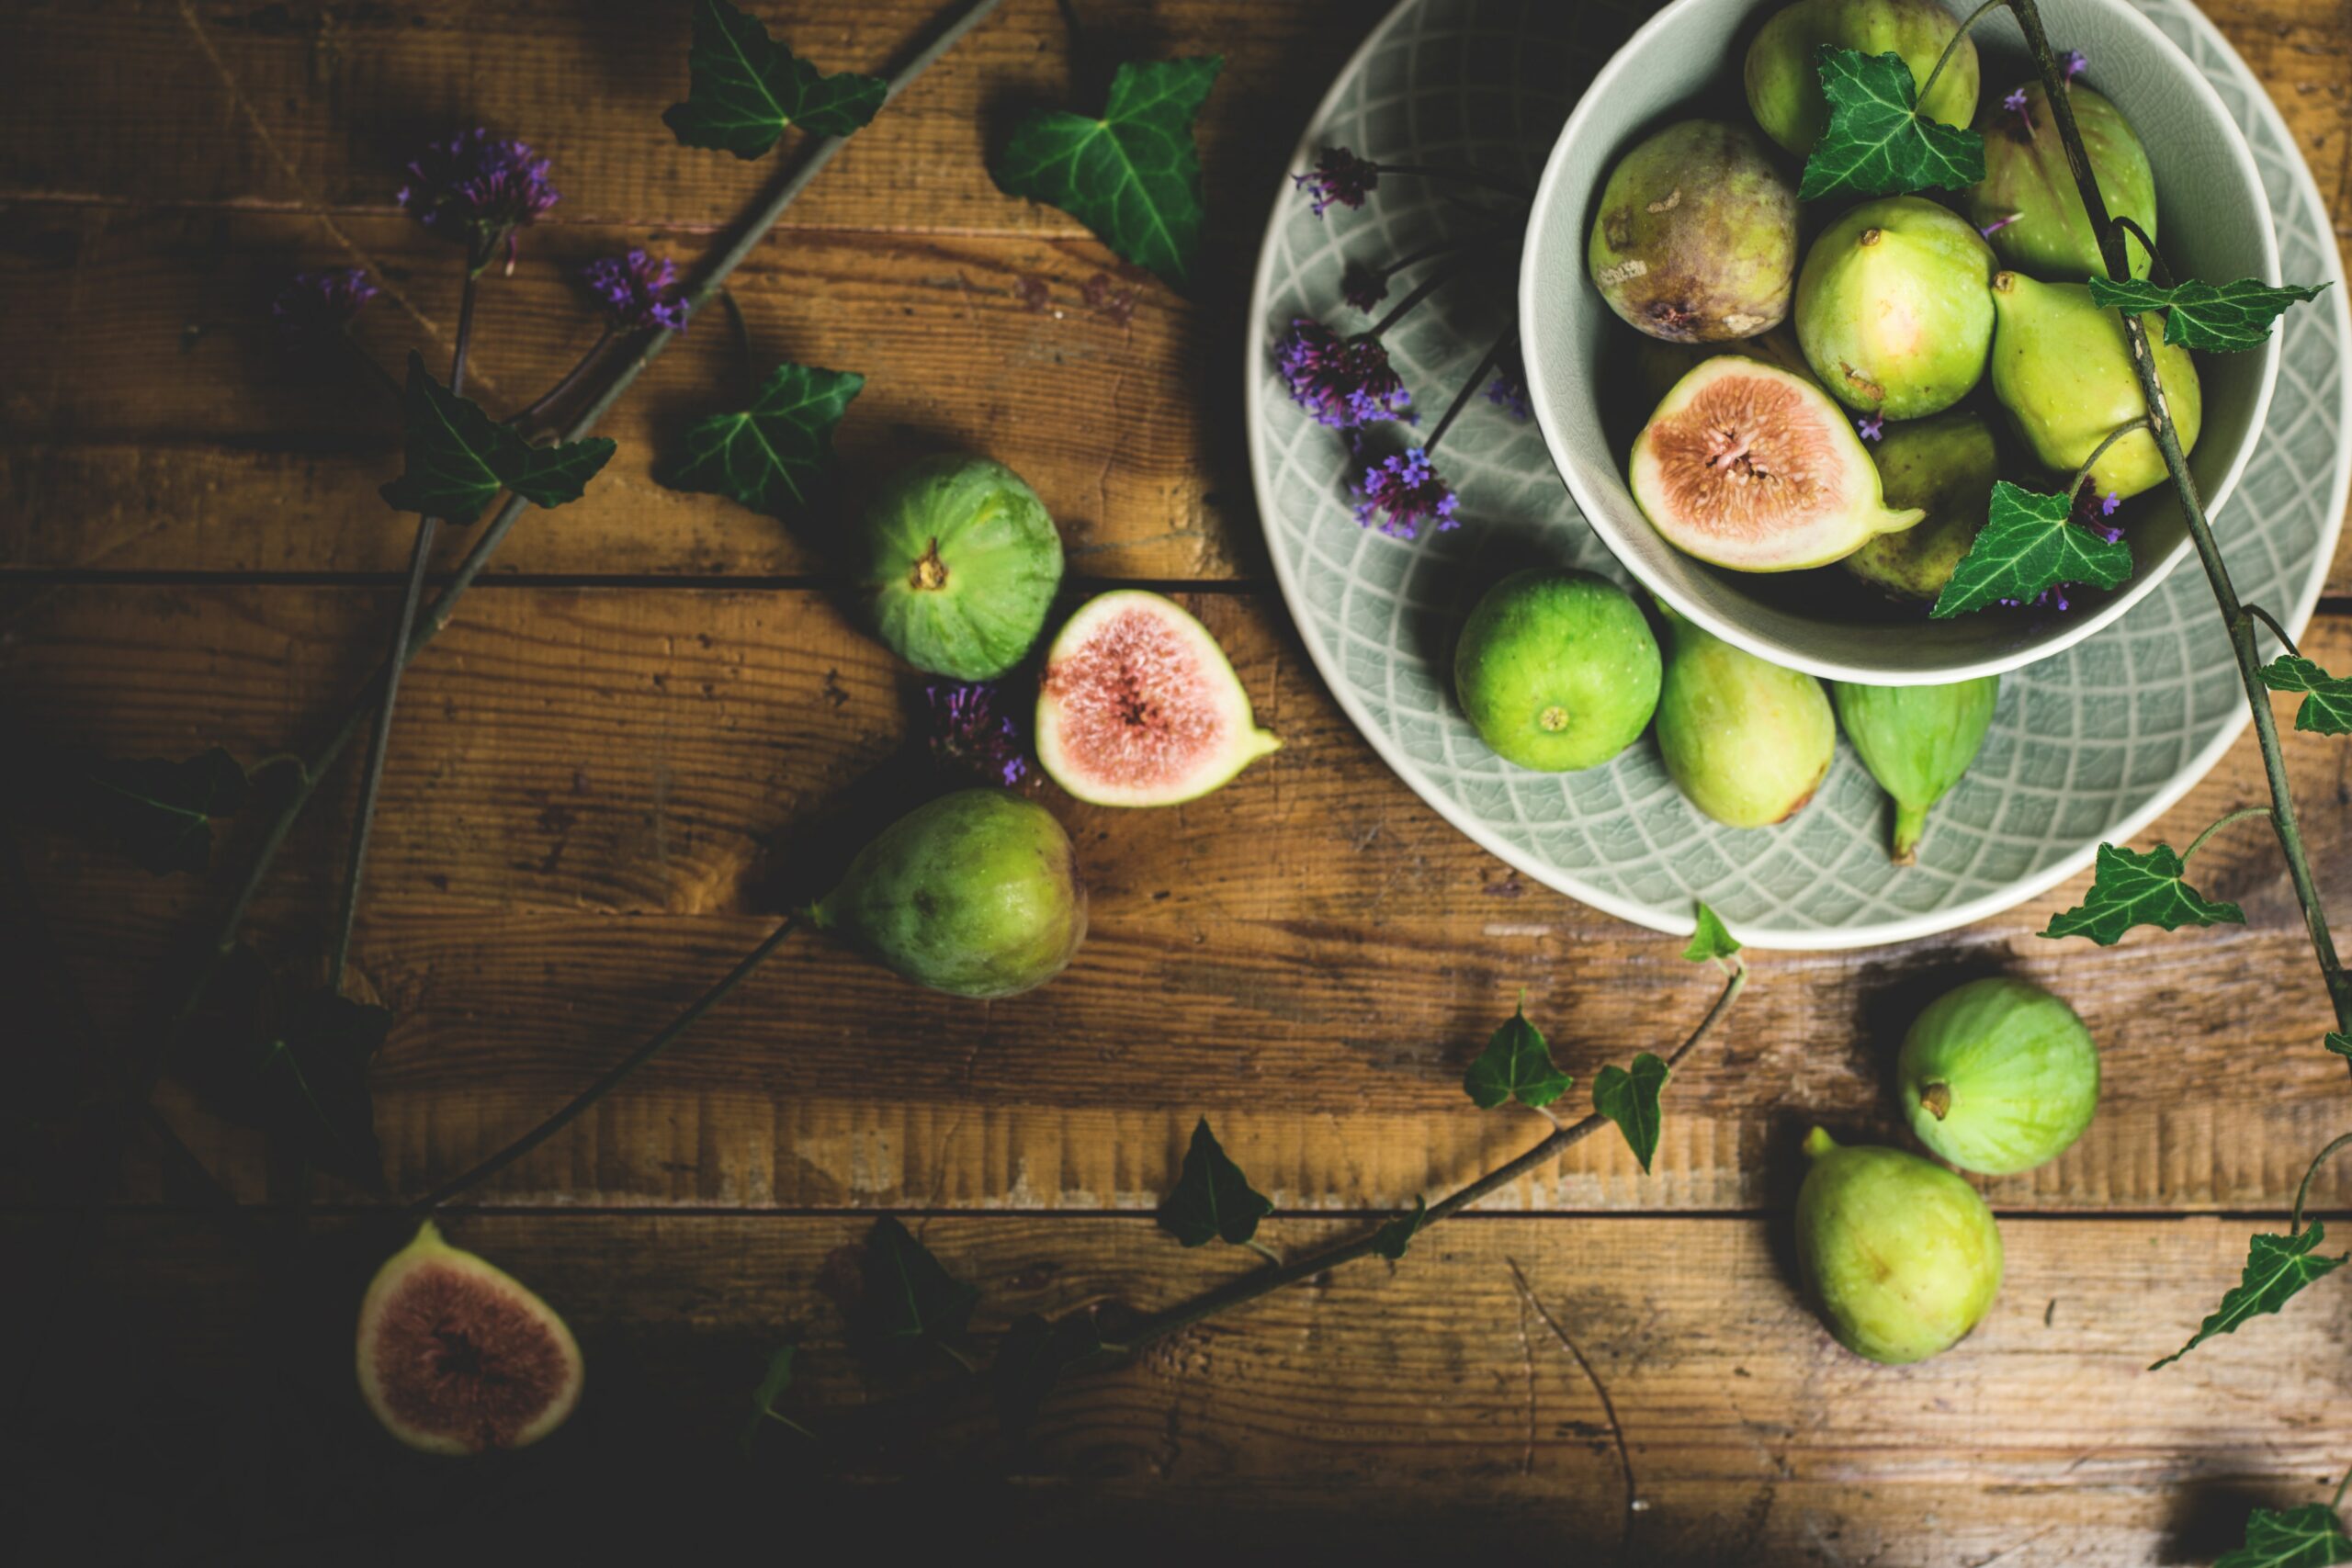 Figs and greens